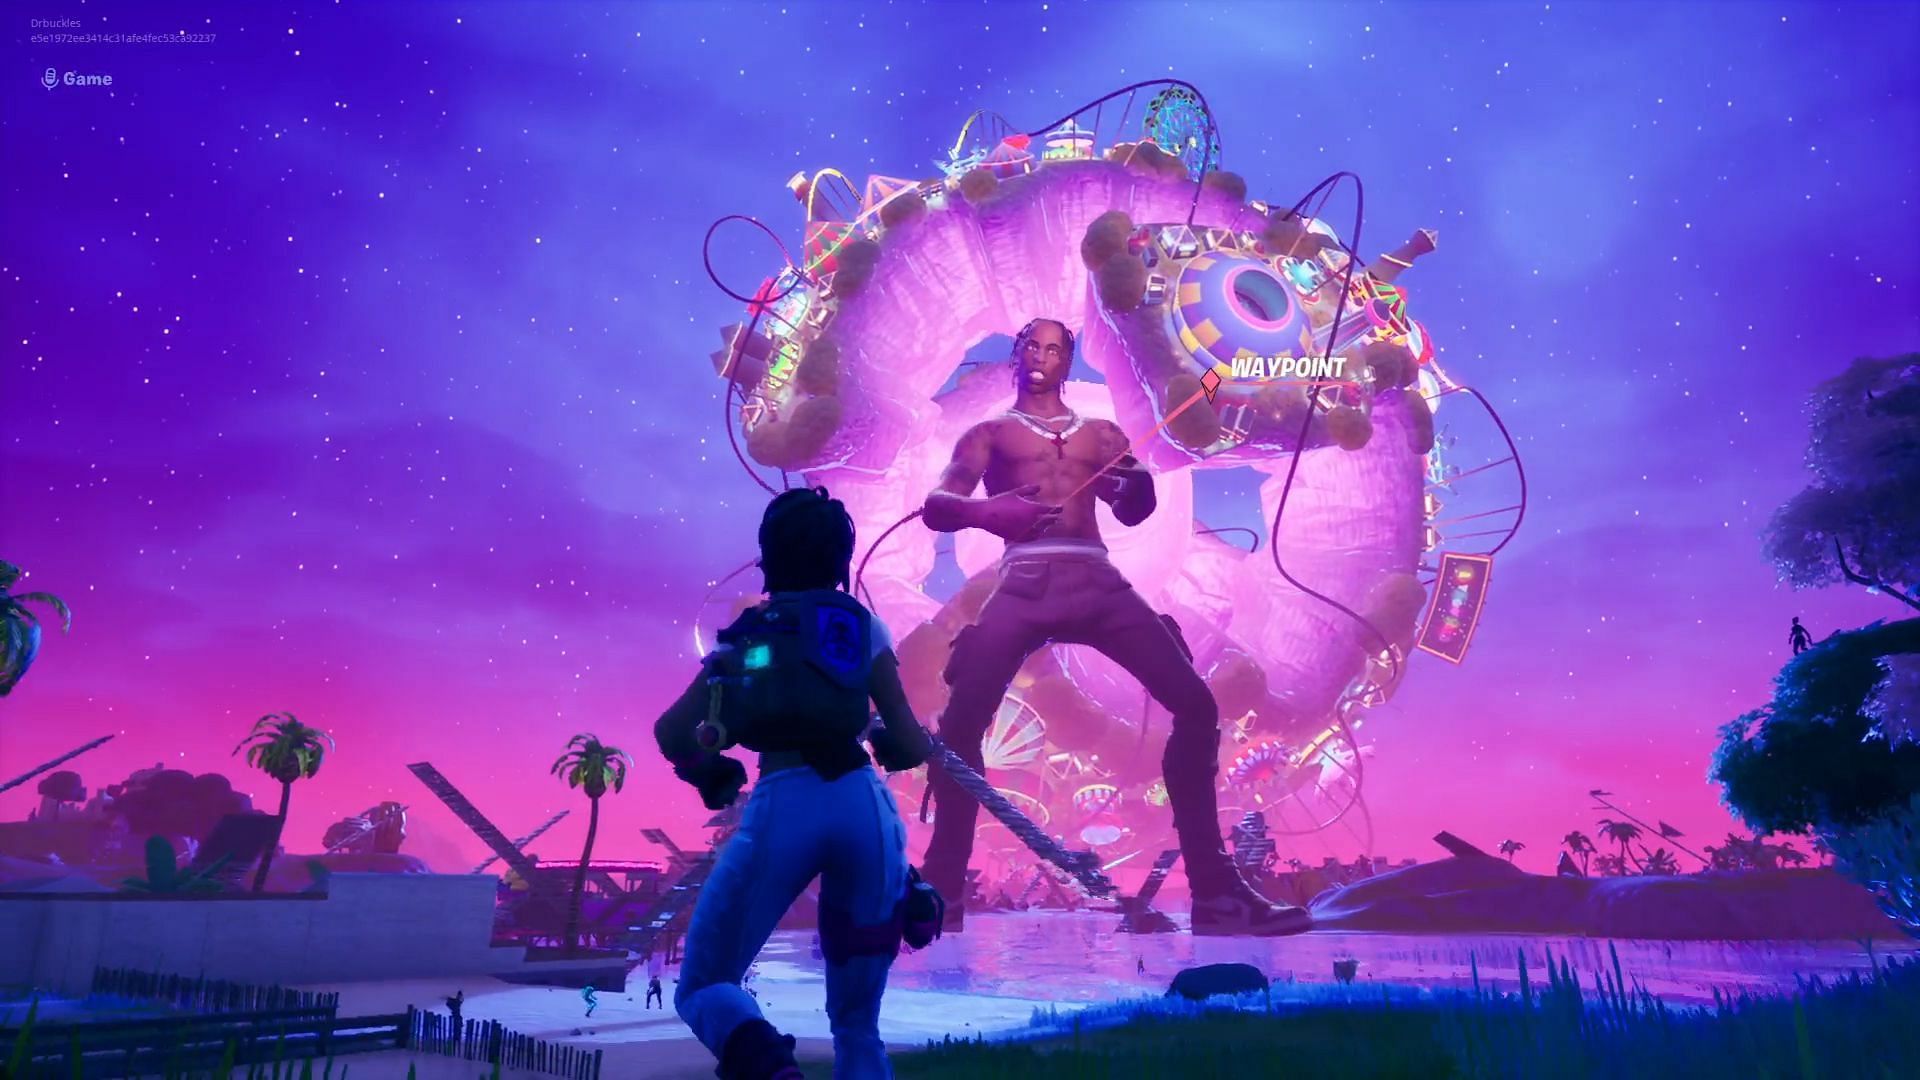 The fan-made Juice WRLD Fortnite concert was inspired by the previous music events in the game (Image via Epic Games)